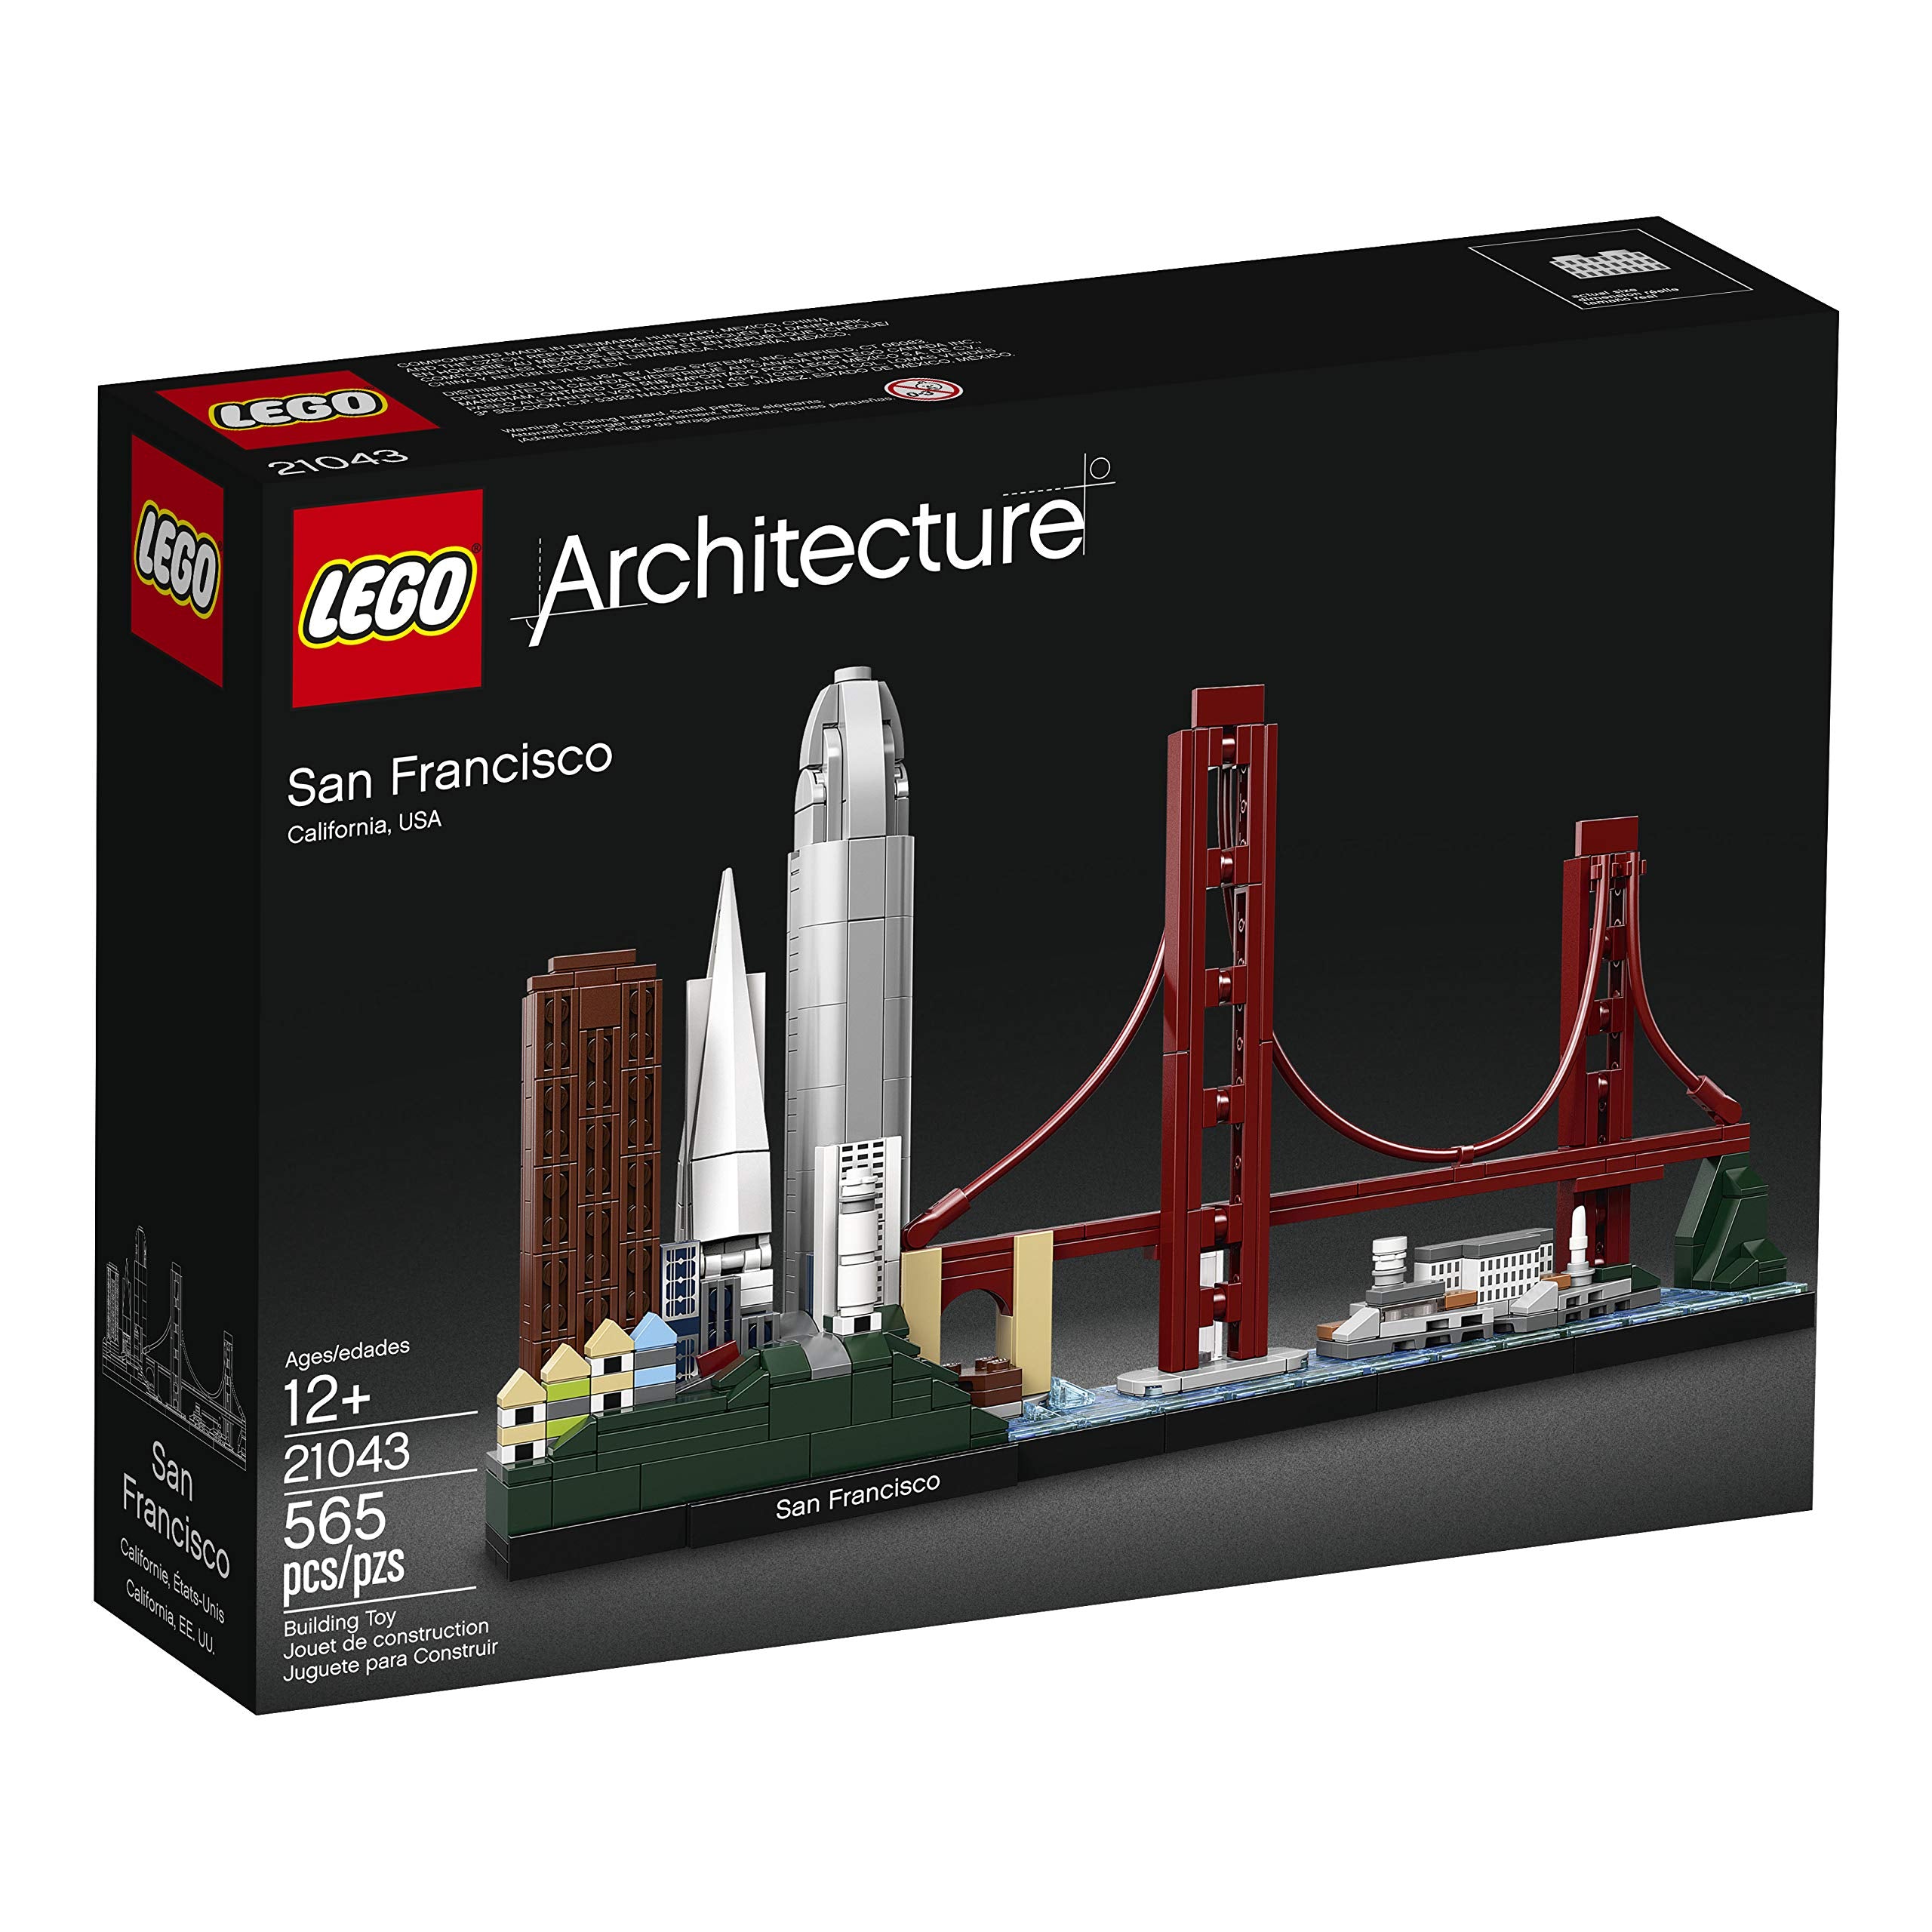 LEGO Architecture Skyline Collection 21043 San Francisco Building Kit (565 Piece) (Like New, Open Box)